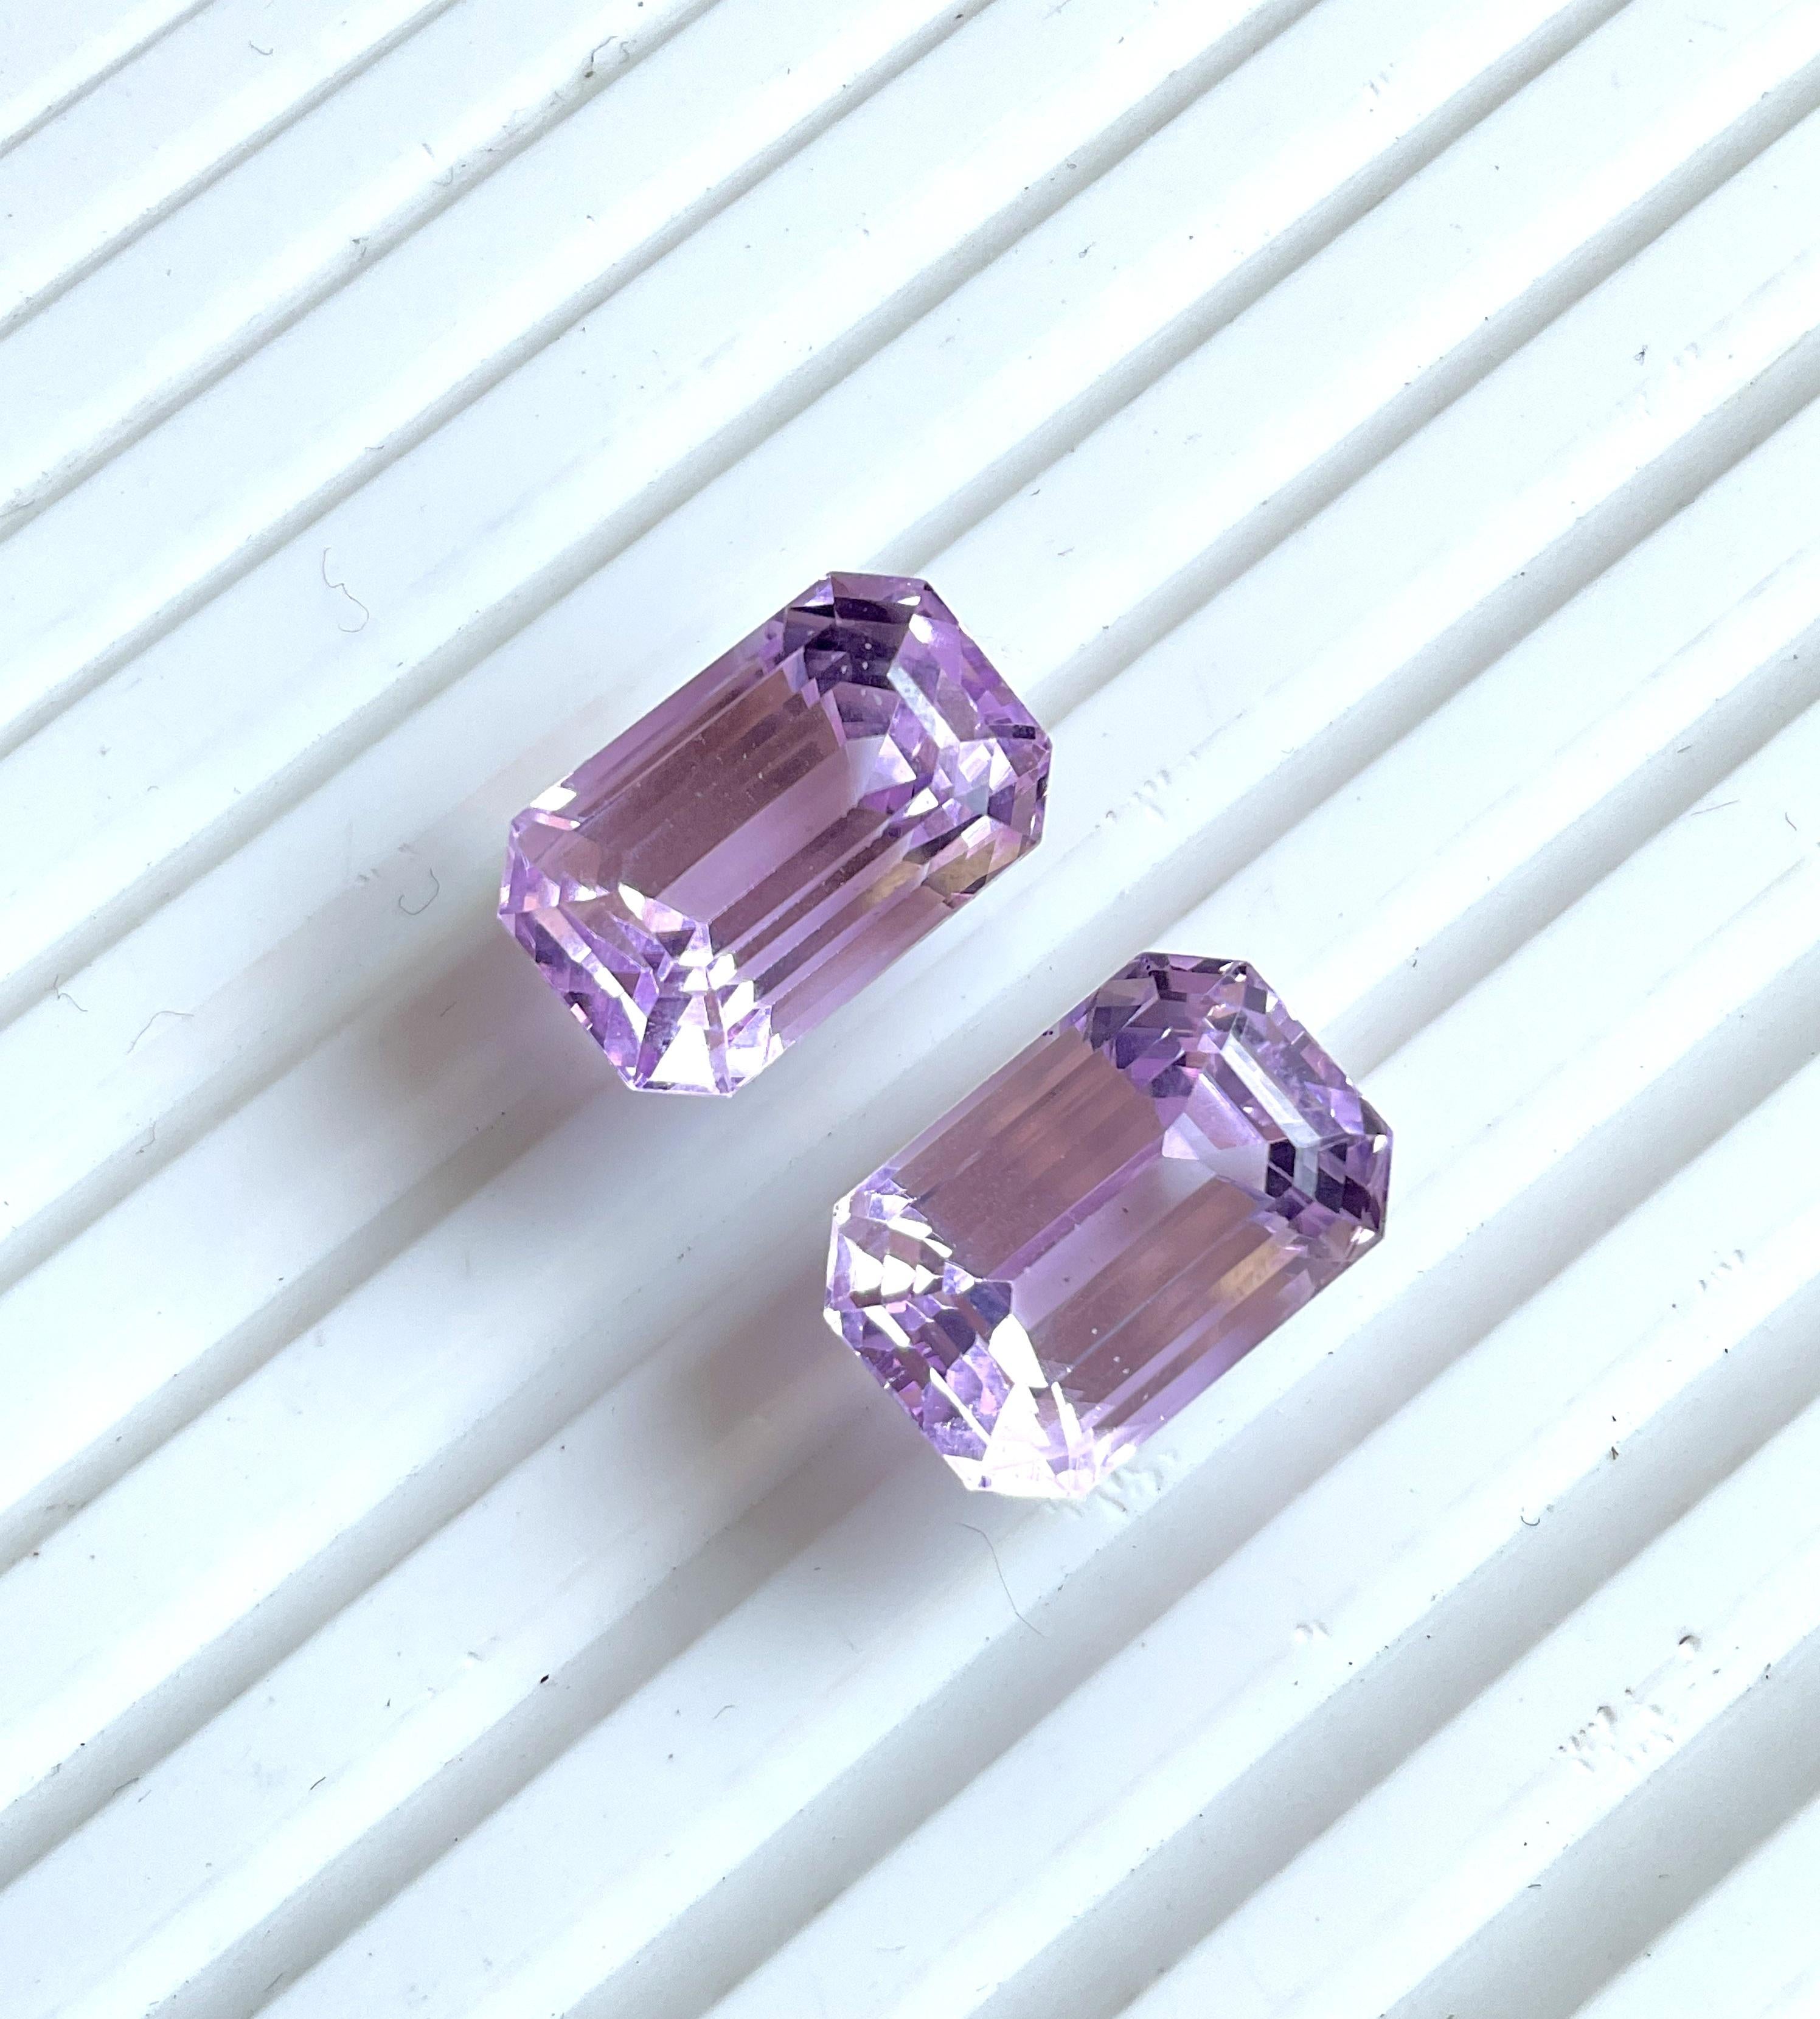 This piece is in a sweet bright pink, the unique cutting style, can be an interesting material for eye-catching jewelry.
35.58 Carats Pink Kunzite Octagon Pair Natural Cut Stone For Fine Gem Jewellery
Weight: 35.58 Carats
Size: 16x11 MM
Pieces: